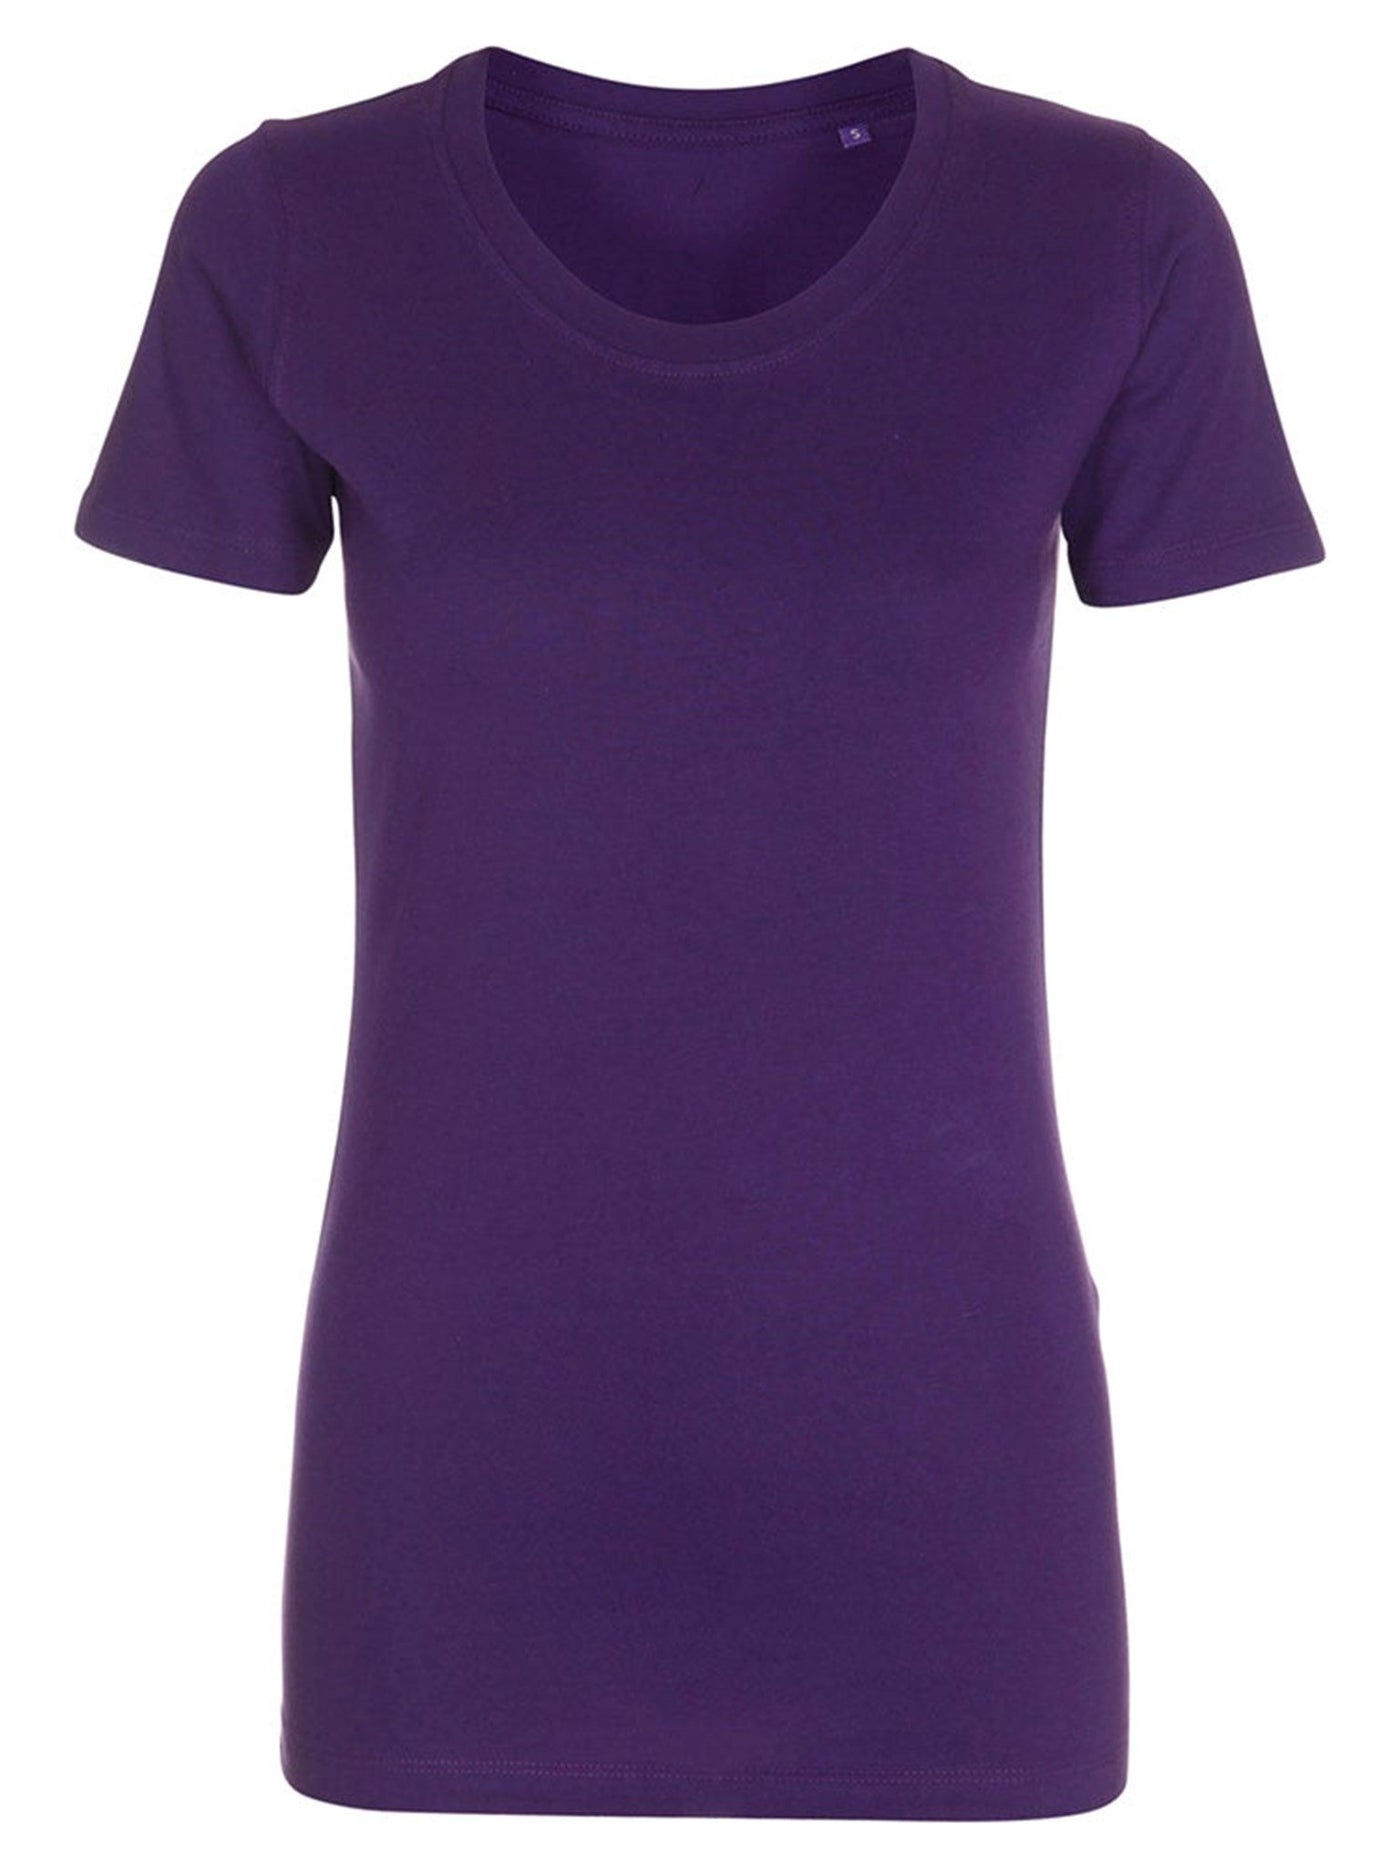 Fitted t-shirt - TeeShoppen - Lilla 4